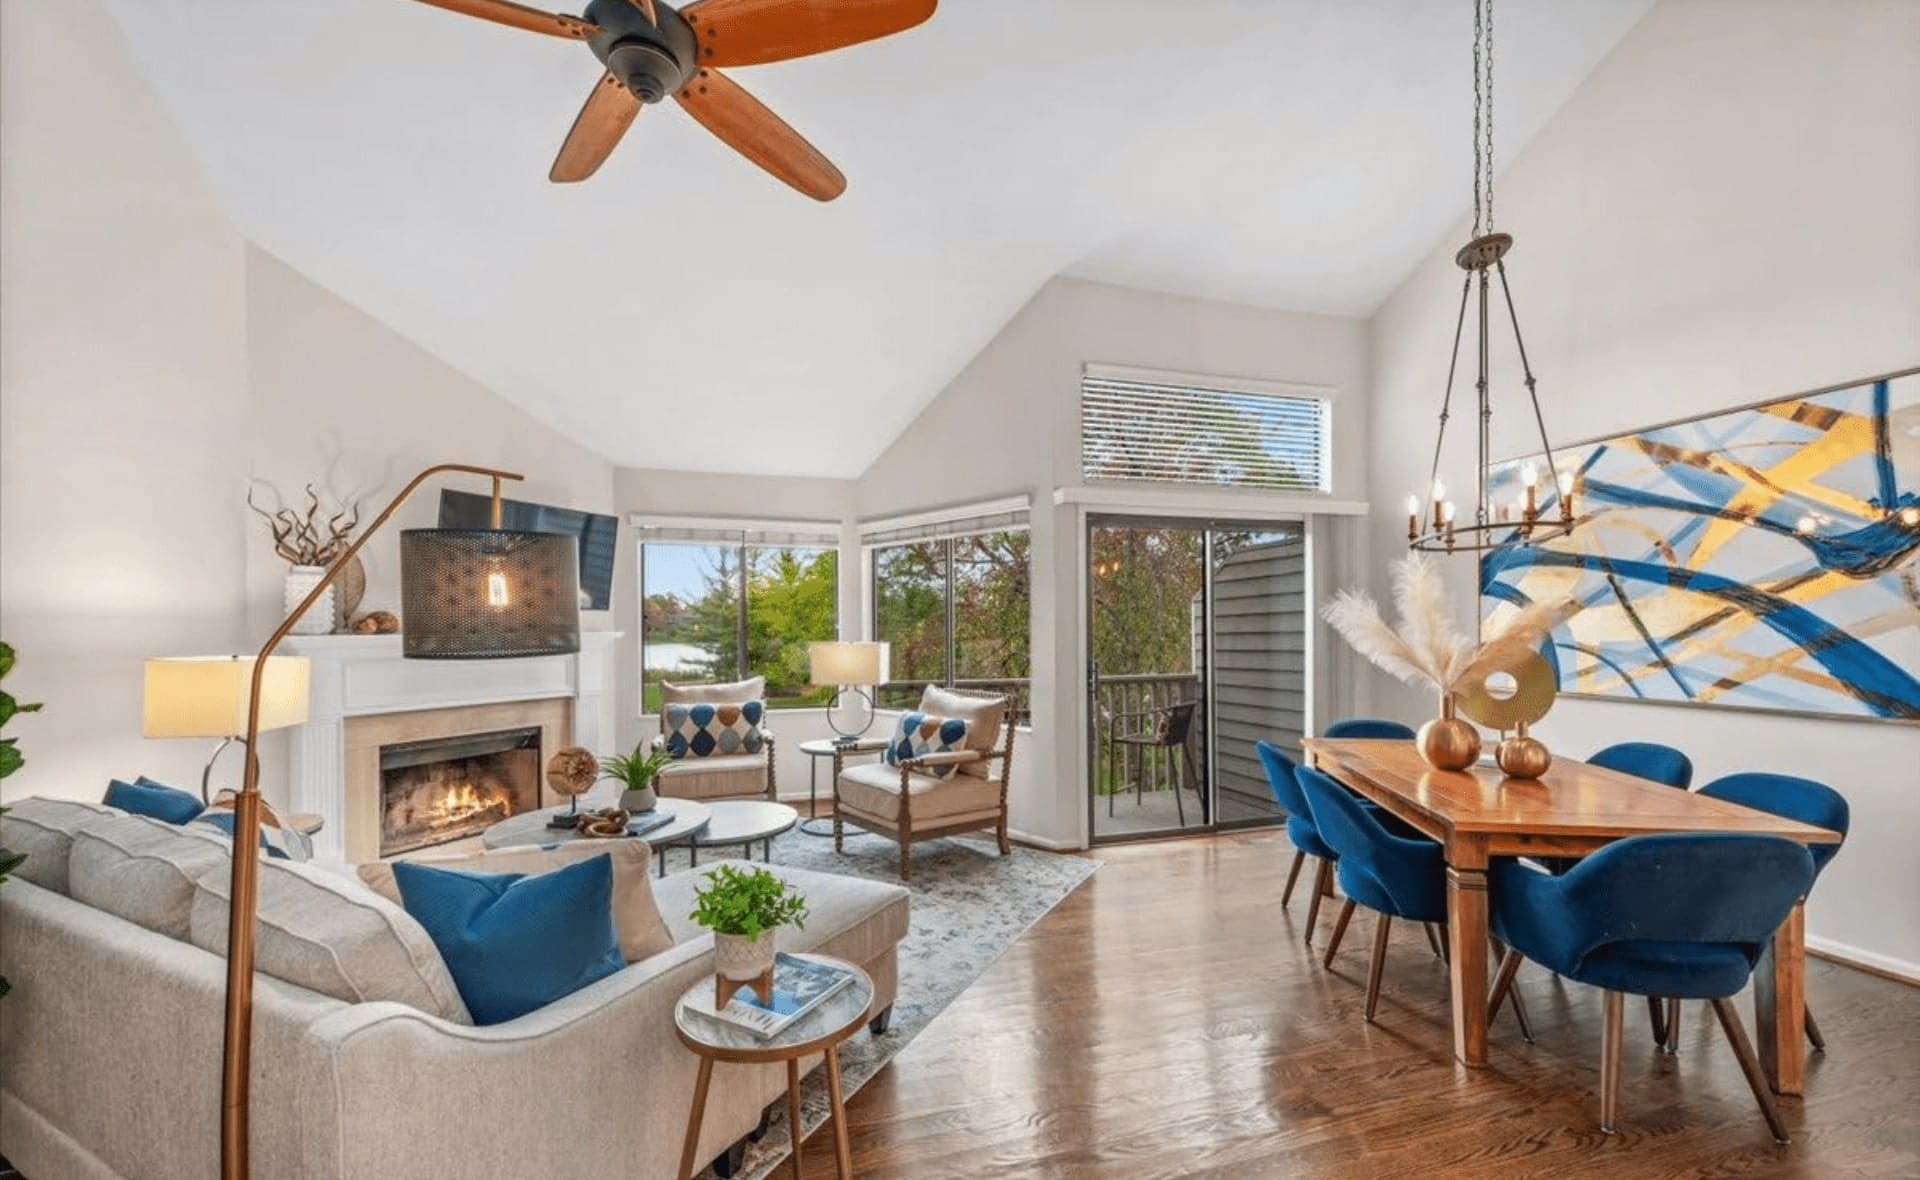 A spacious staged living room featuring beautiful hardwood floors and a stylish ceiling fan.